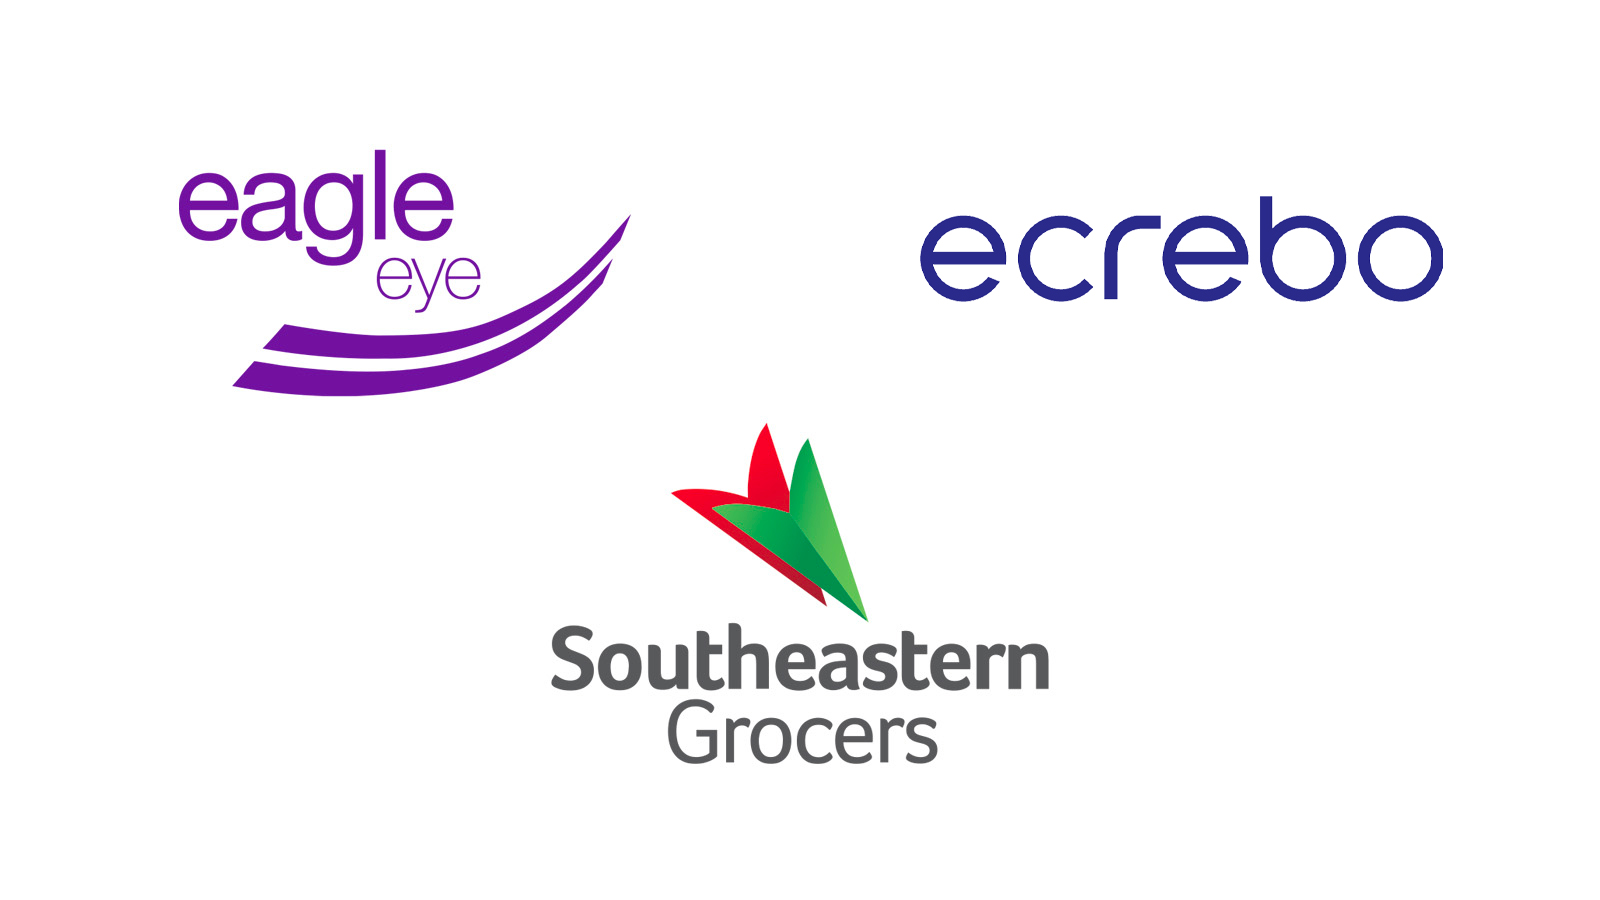 Eagle Eye and Ecrebo Partner with Southeastern Grocers to Enable an Omnichannel Retail Strategy